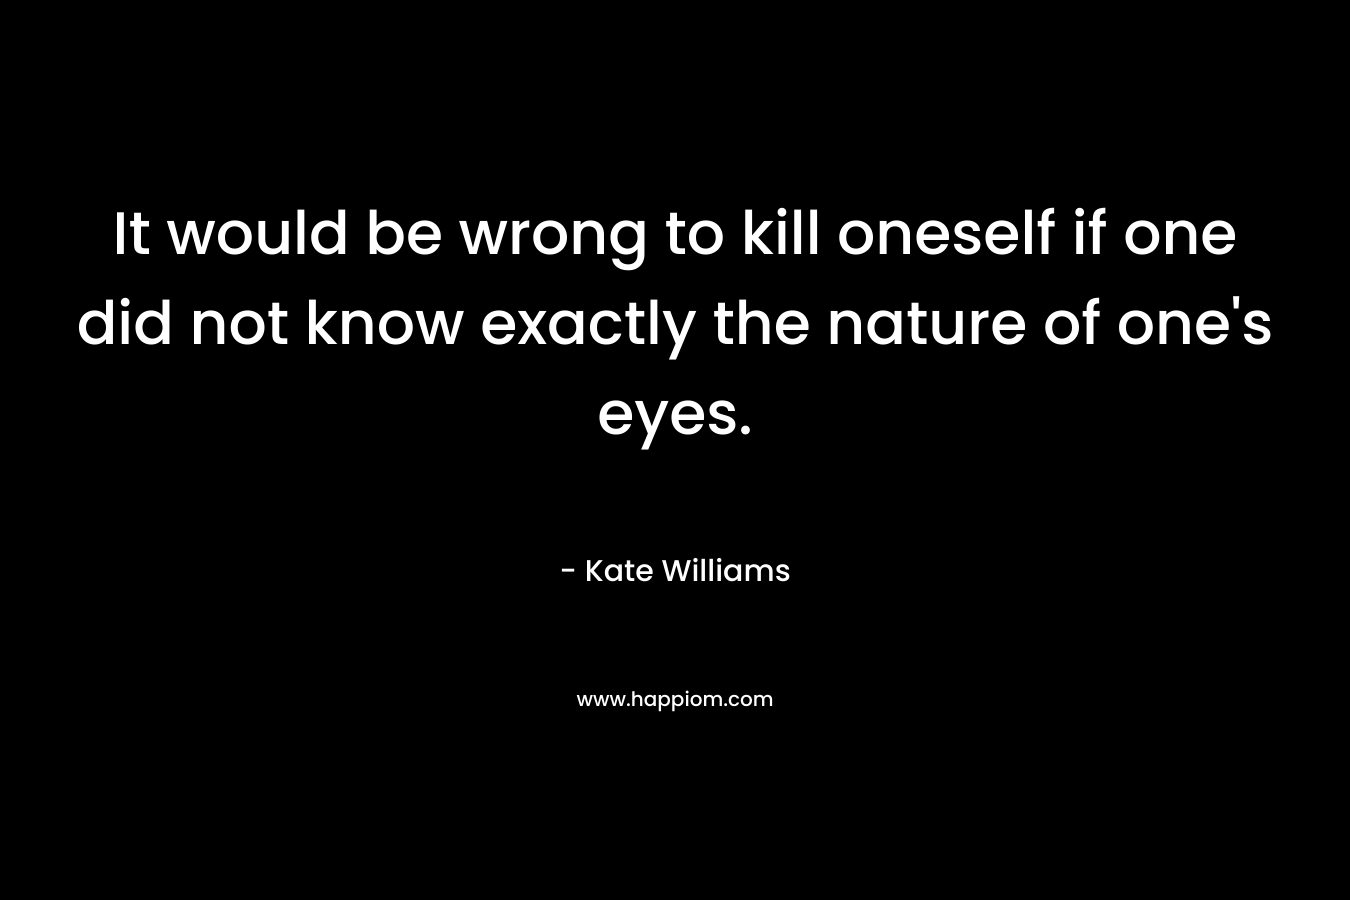 It would be wrong to kill oneself if one did not know exactly the nature of one’s eyes. – Kate Williams